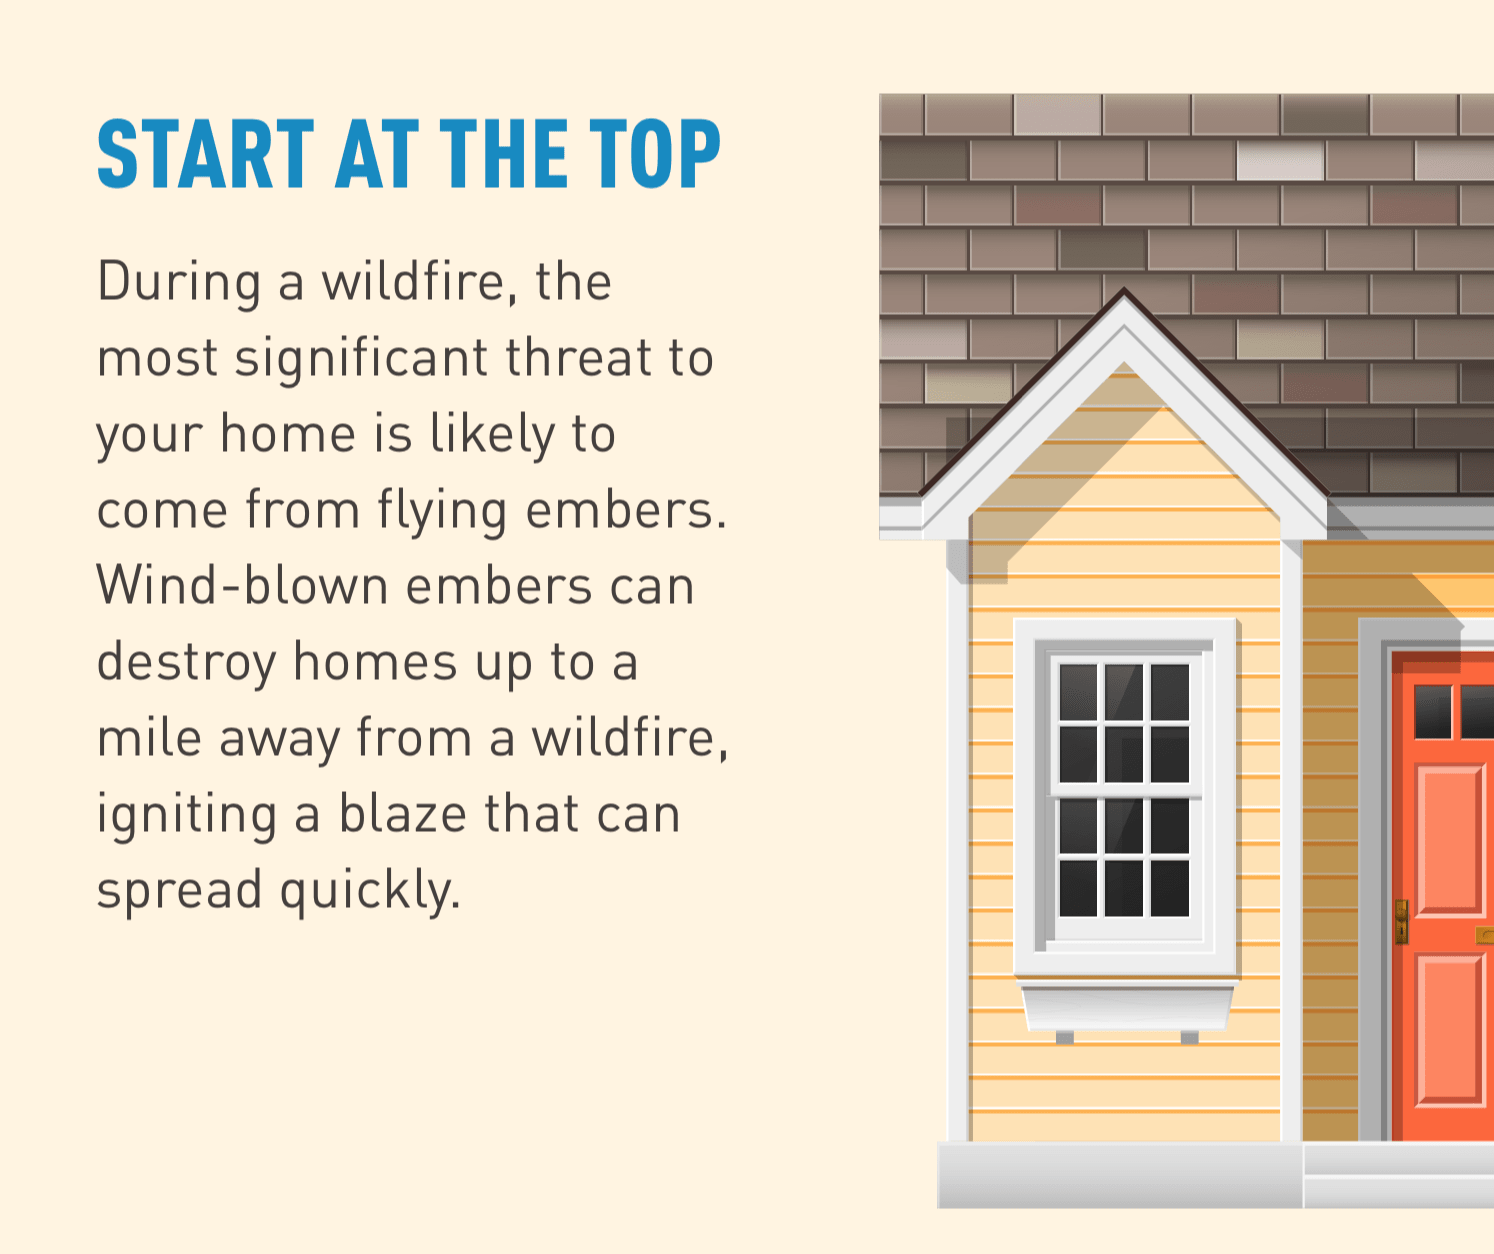 Illustration of a yellow home with a red door. During a wildfire, the most significant threat to your home is likely to come from flying embers. Wind-blown embers can destroy homes up to a mile away from a wildfire, igniting a blaze that can spread quickly.